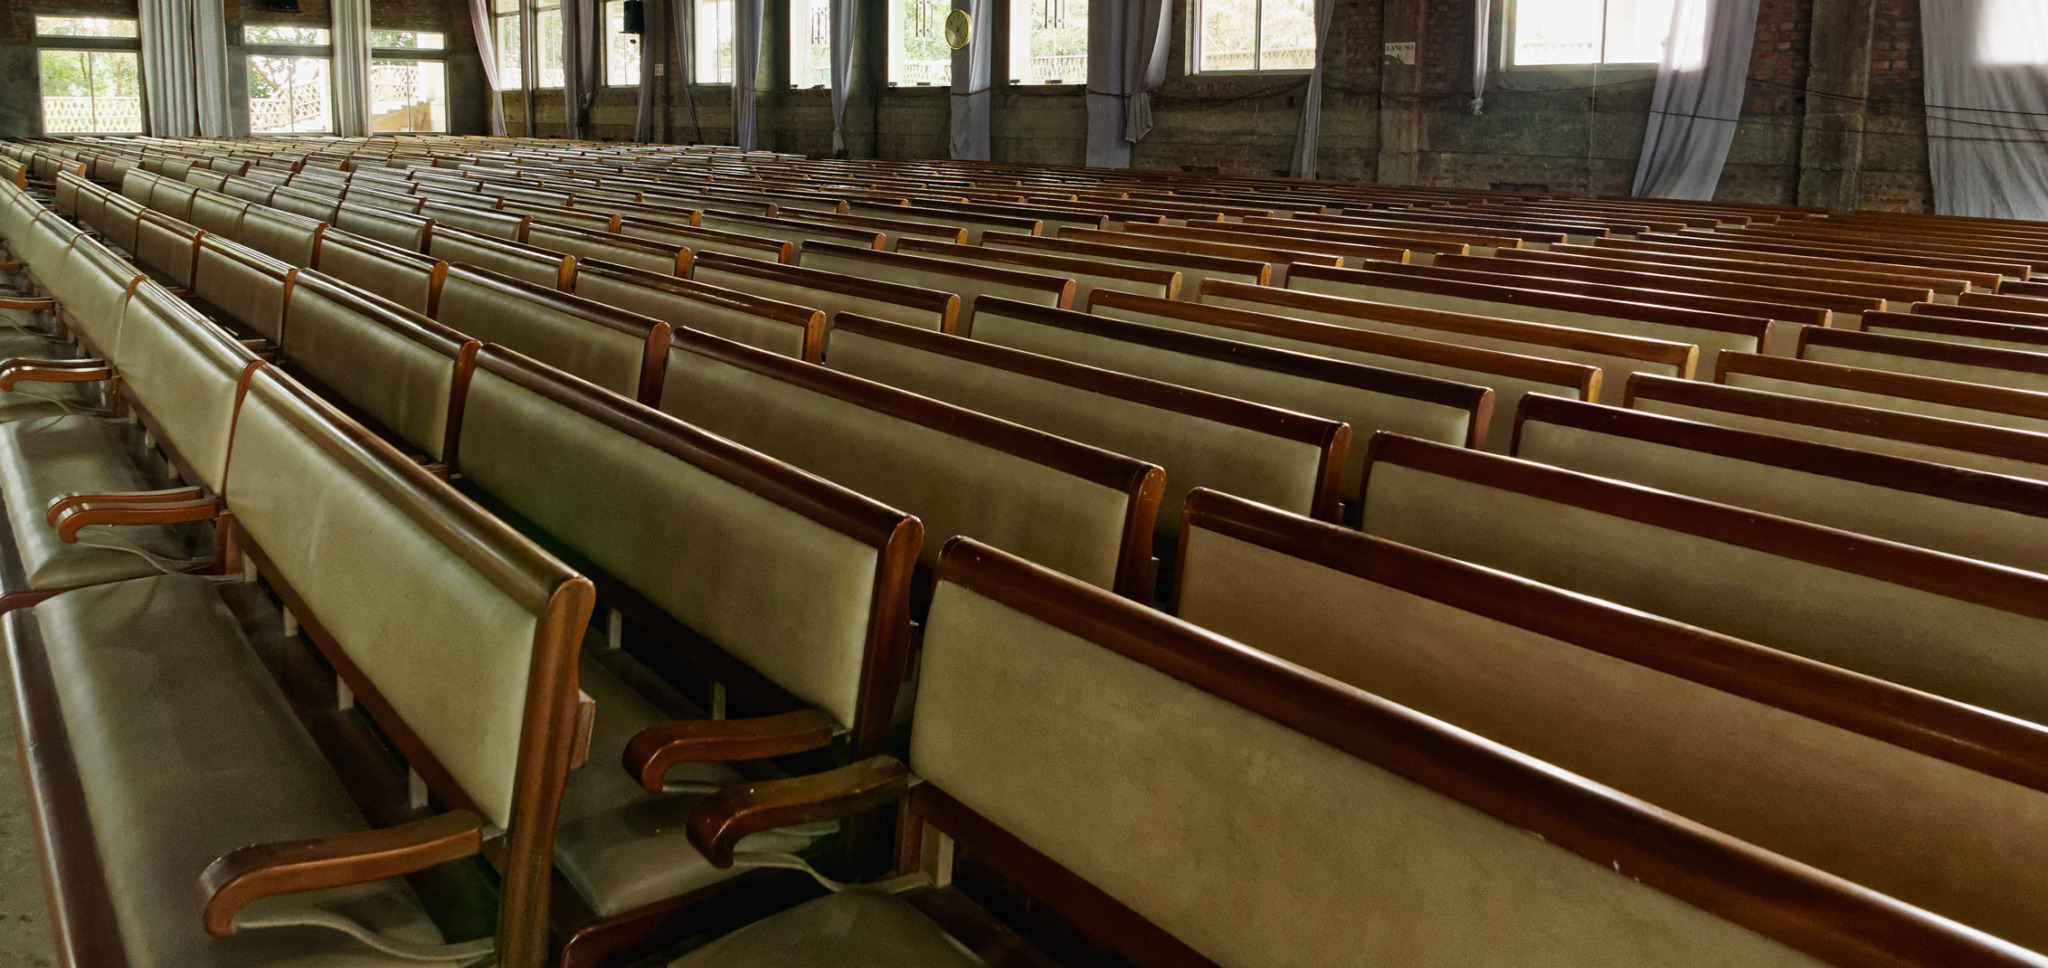 Pews inside the main hall that can accommodate up to 2,000 people